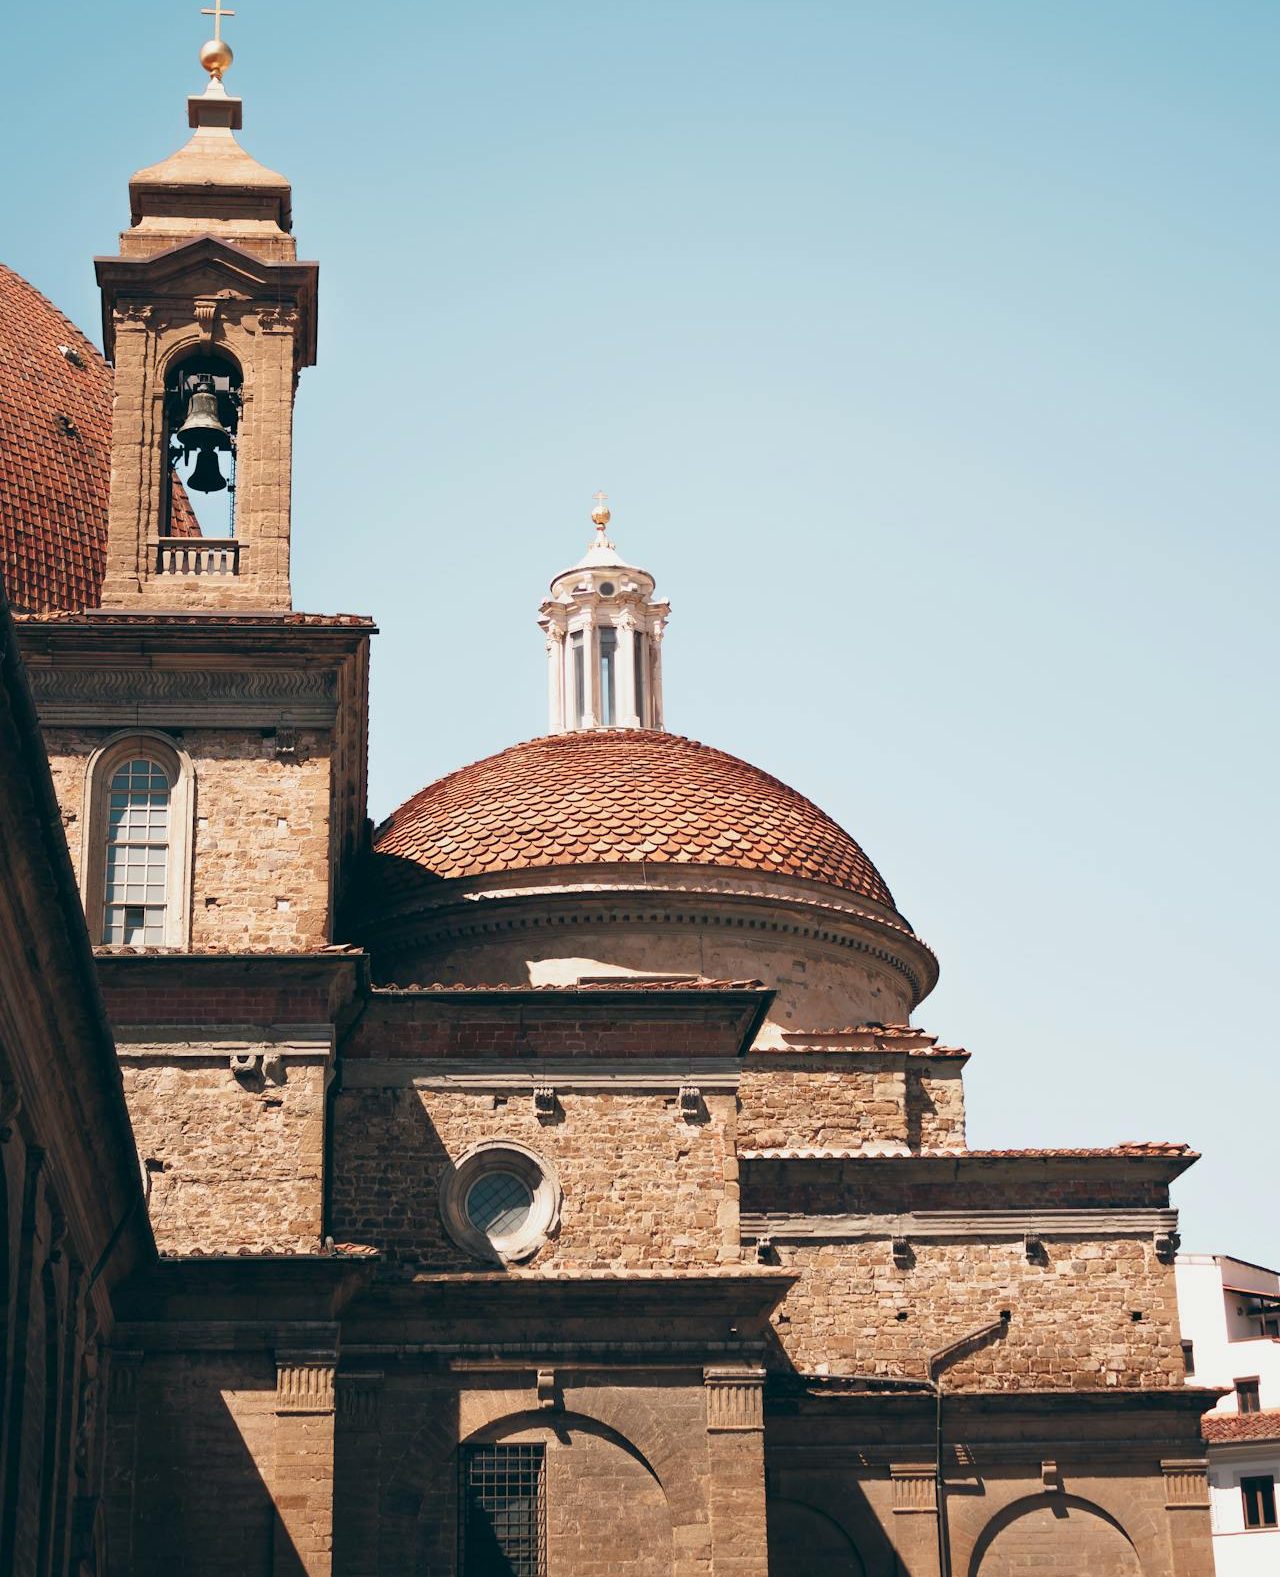 Basilica of San Lorenzo in Florence, Florence tourist attractions